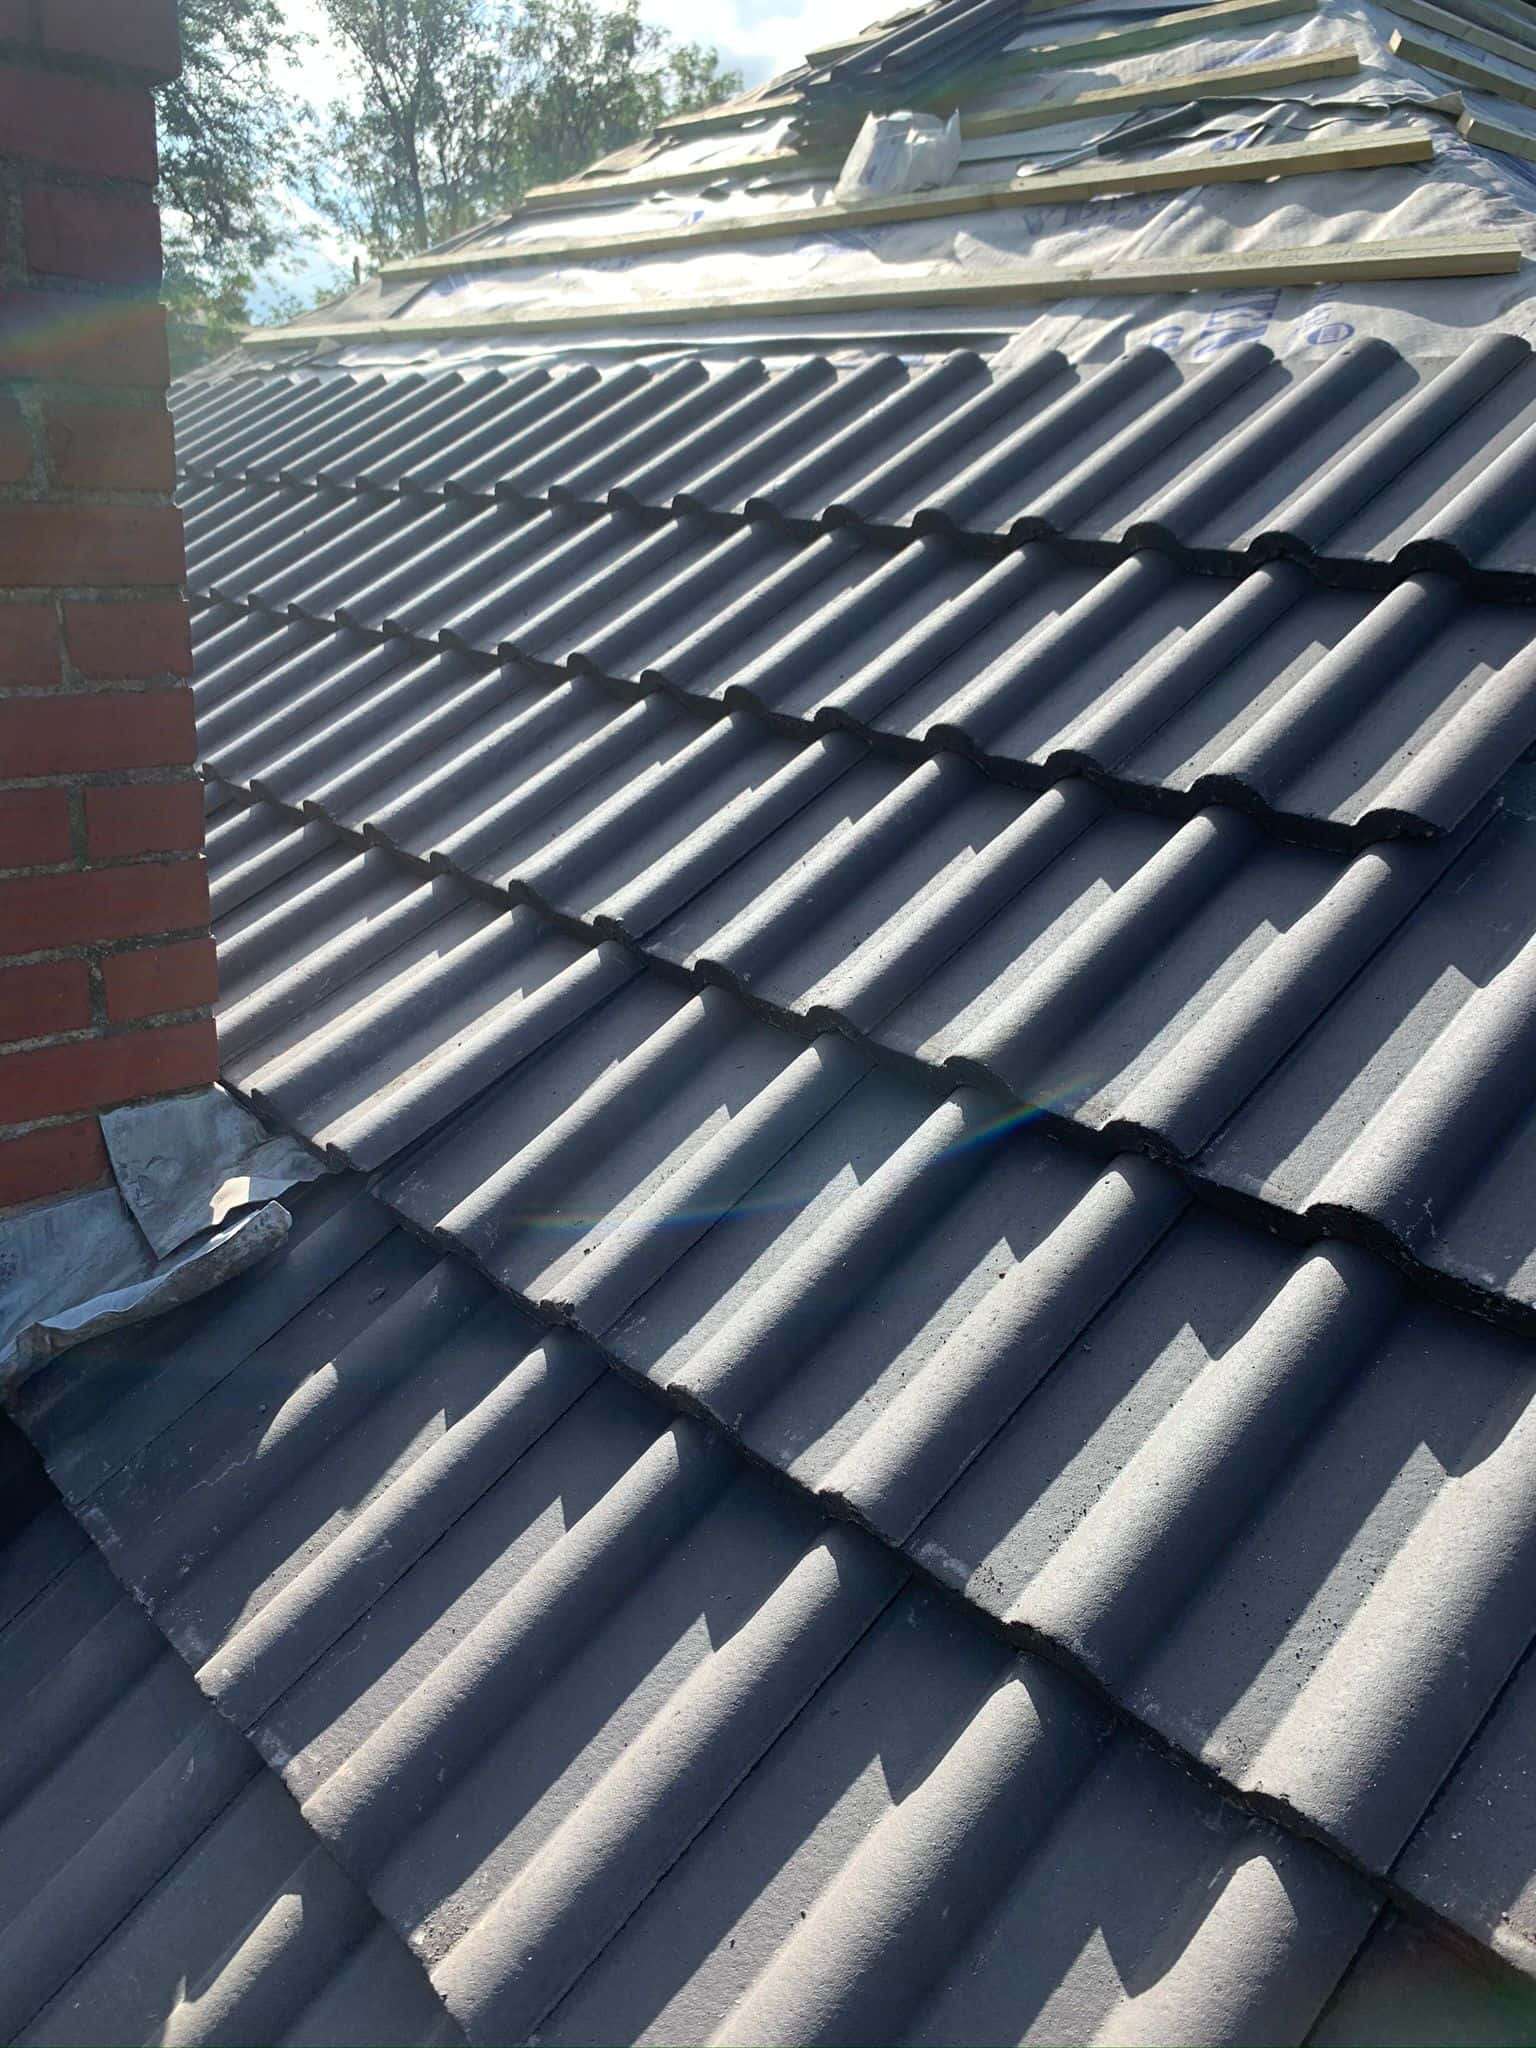 This is a photo of a re-roof where the works are in progress, the felt, batten and a few rows of tiles have been installed by EF Roofing Doncaster